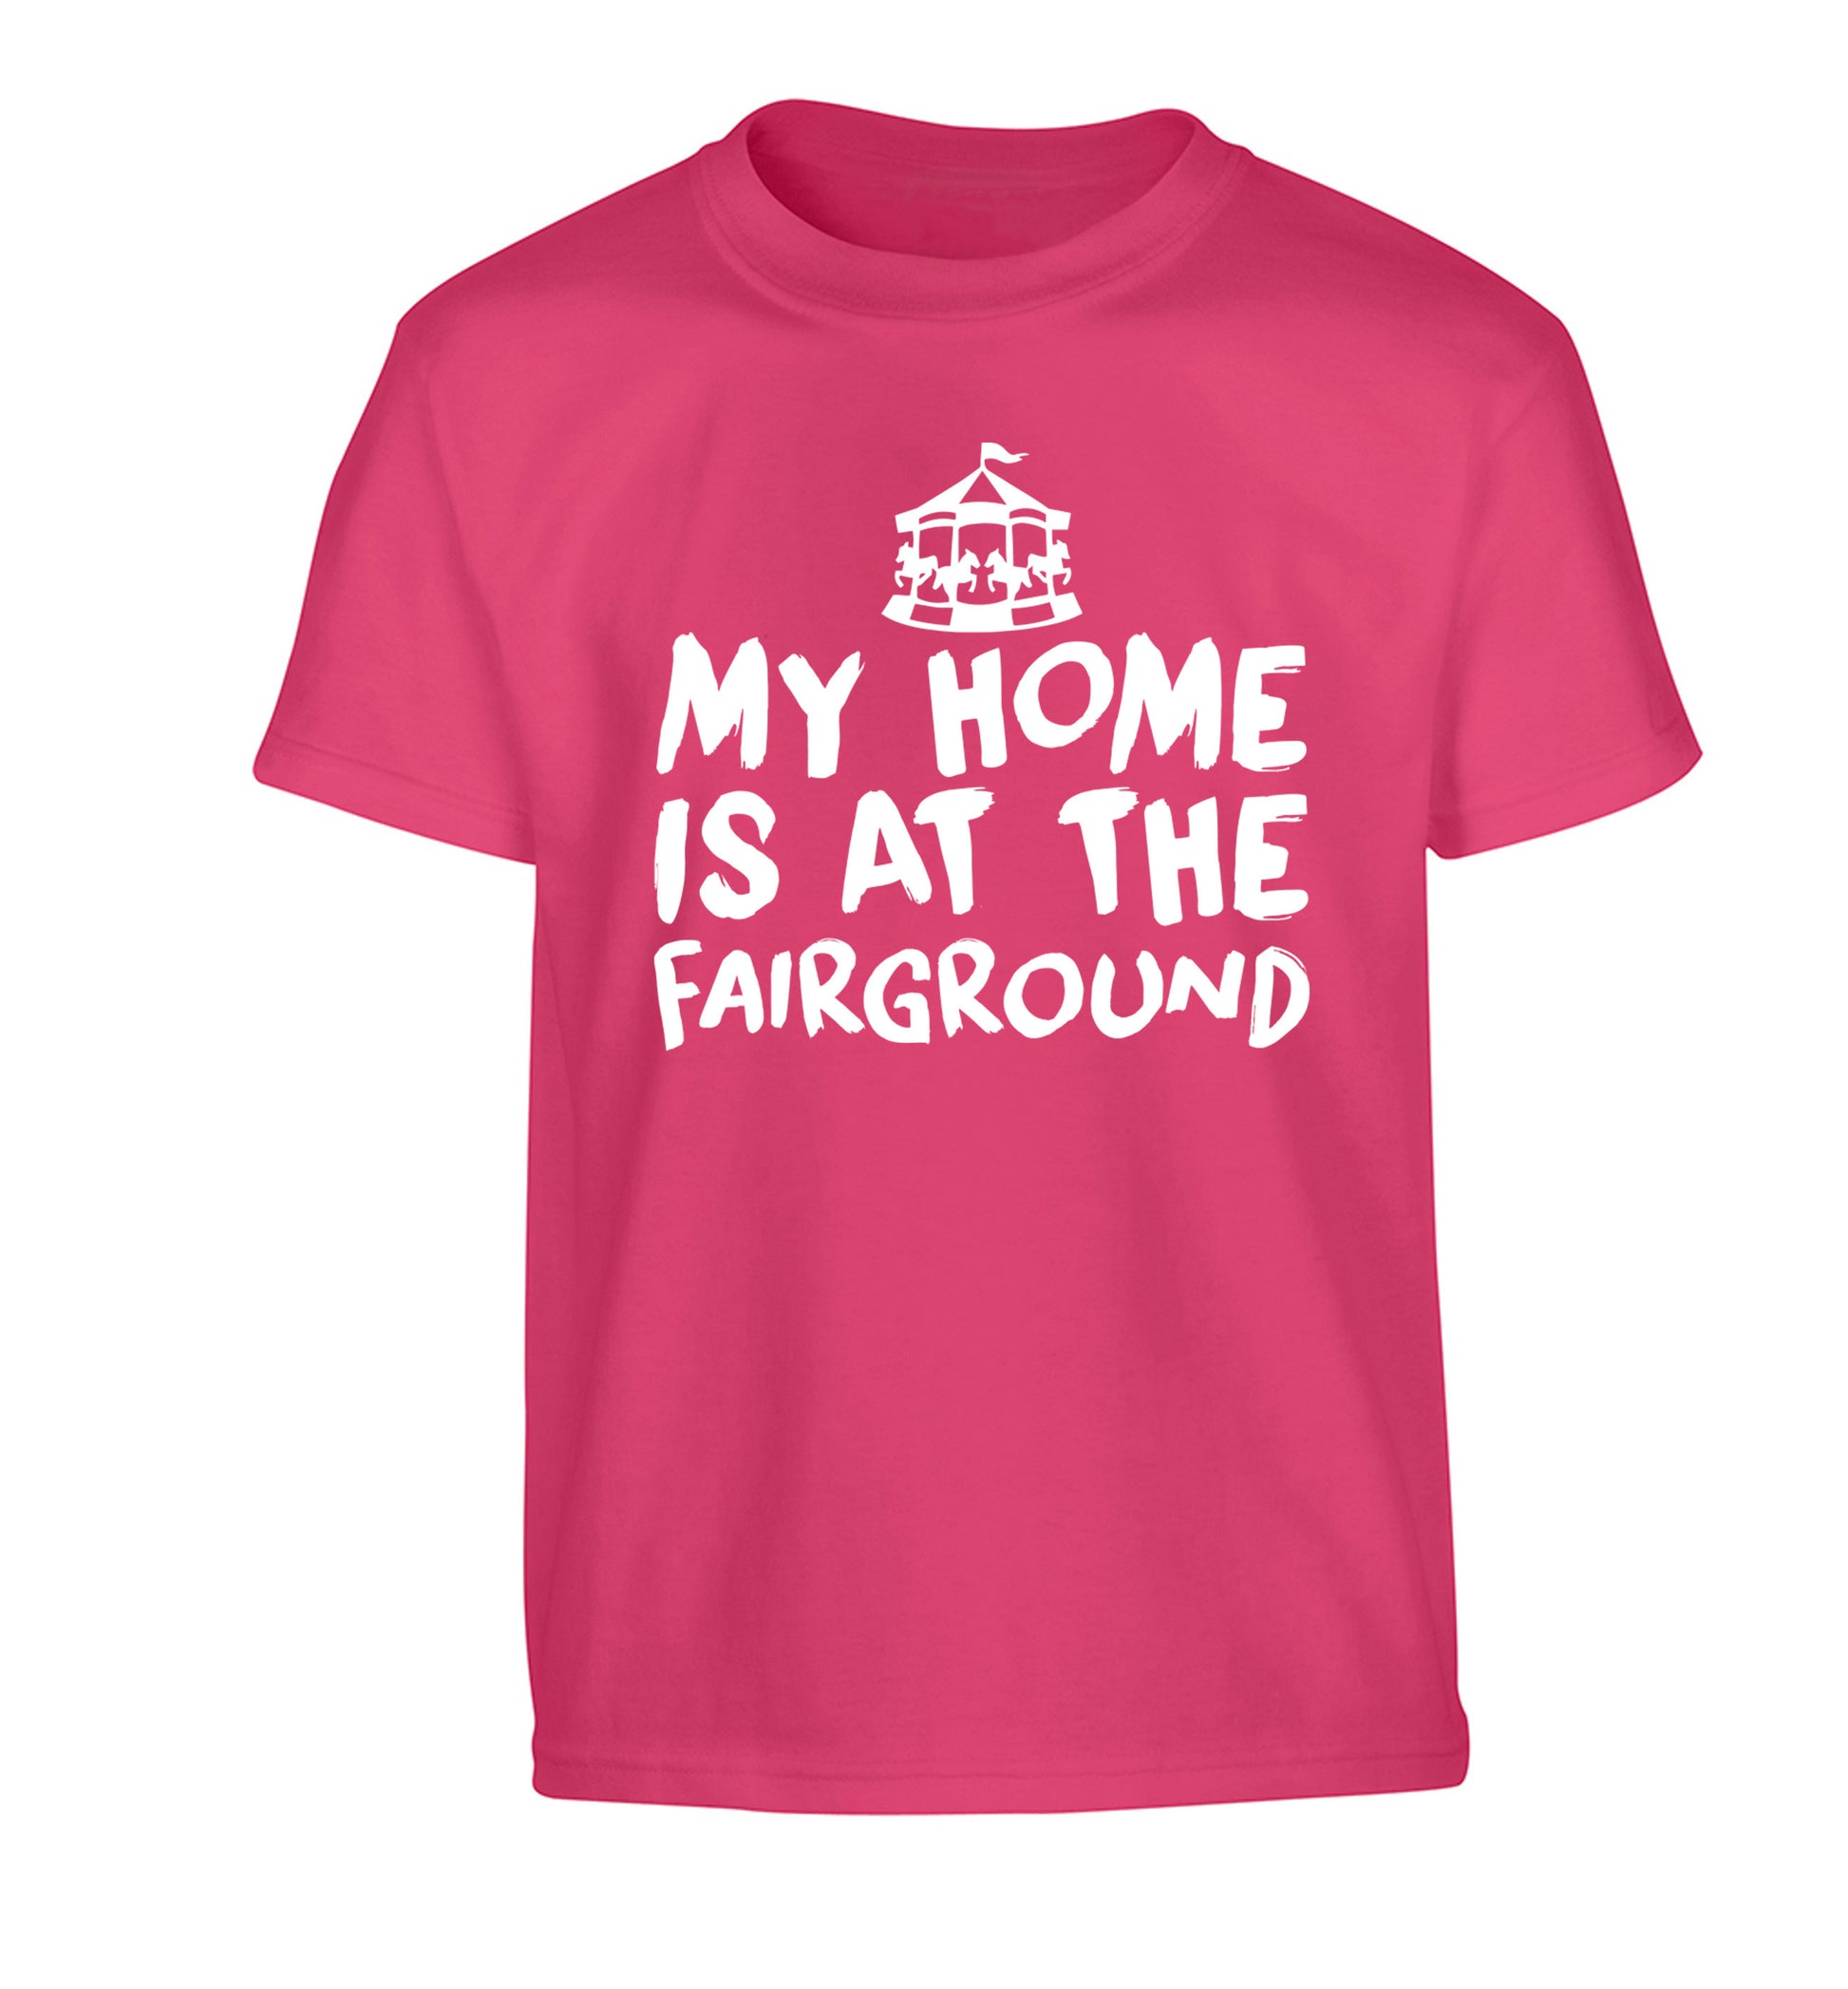 My home is at the fairground Children's pink Tshirt 12-14 Years